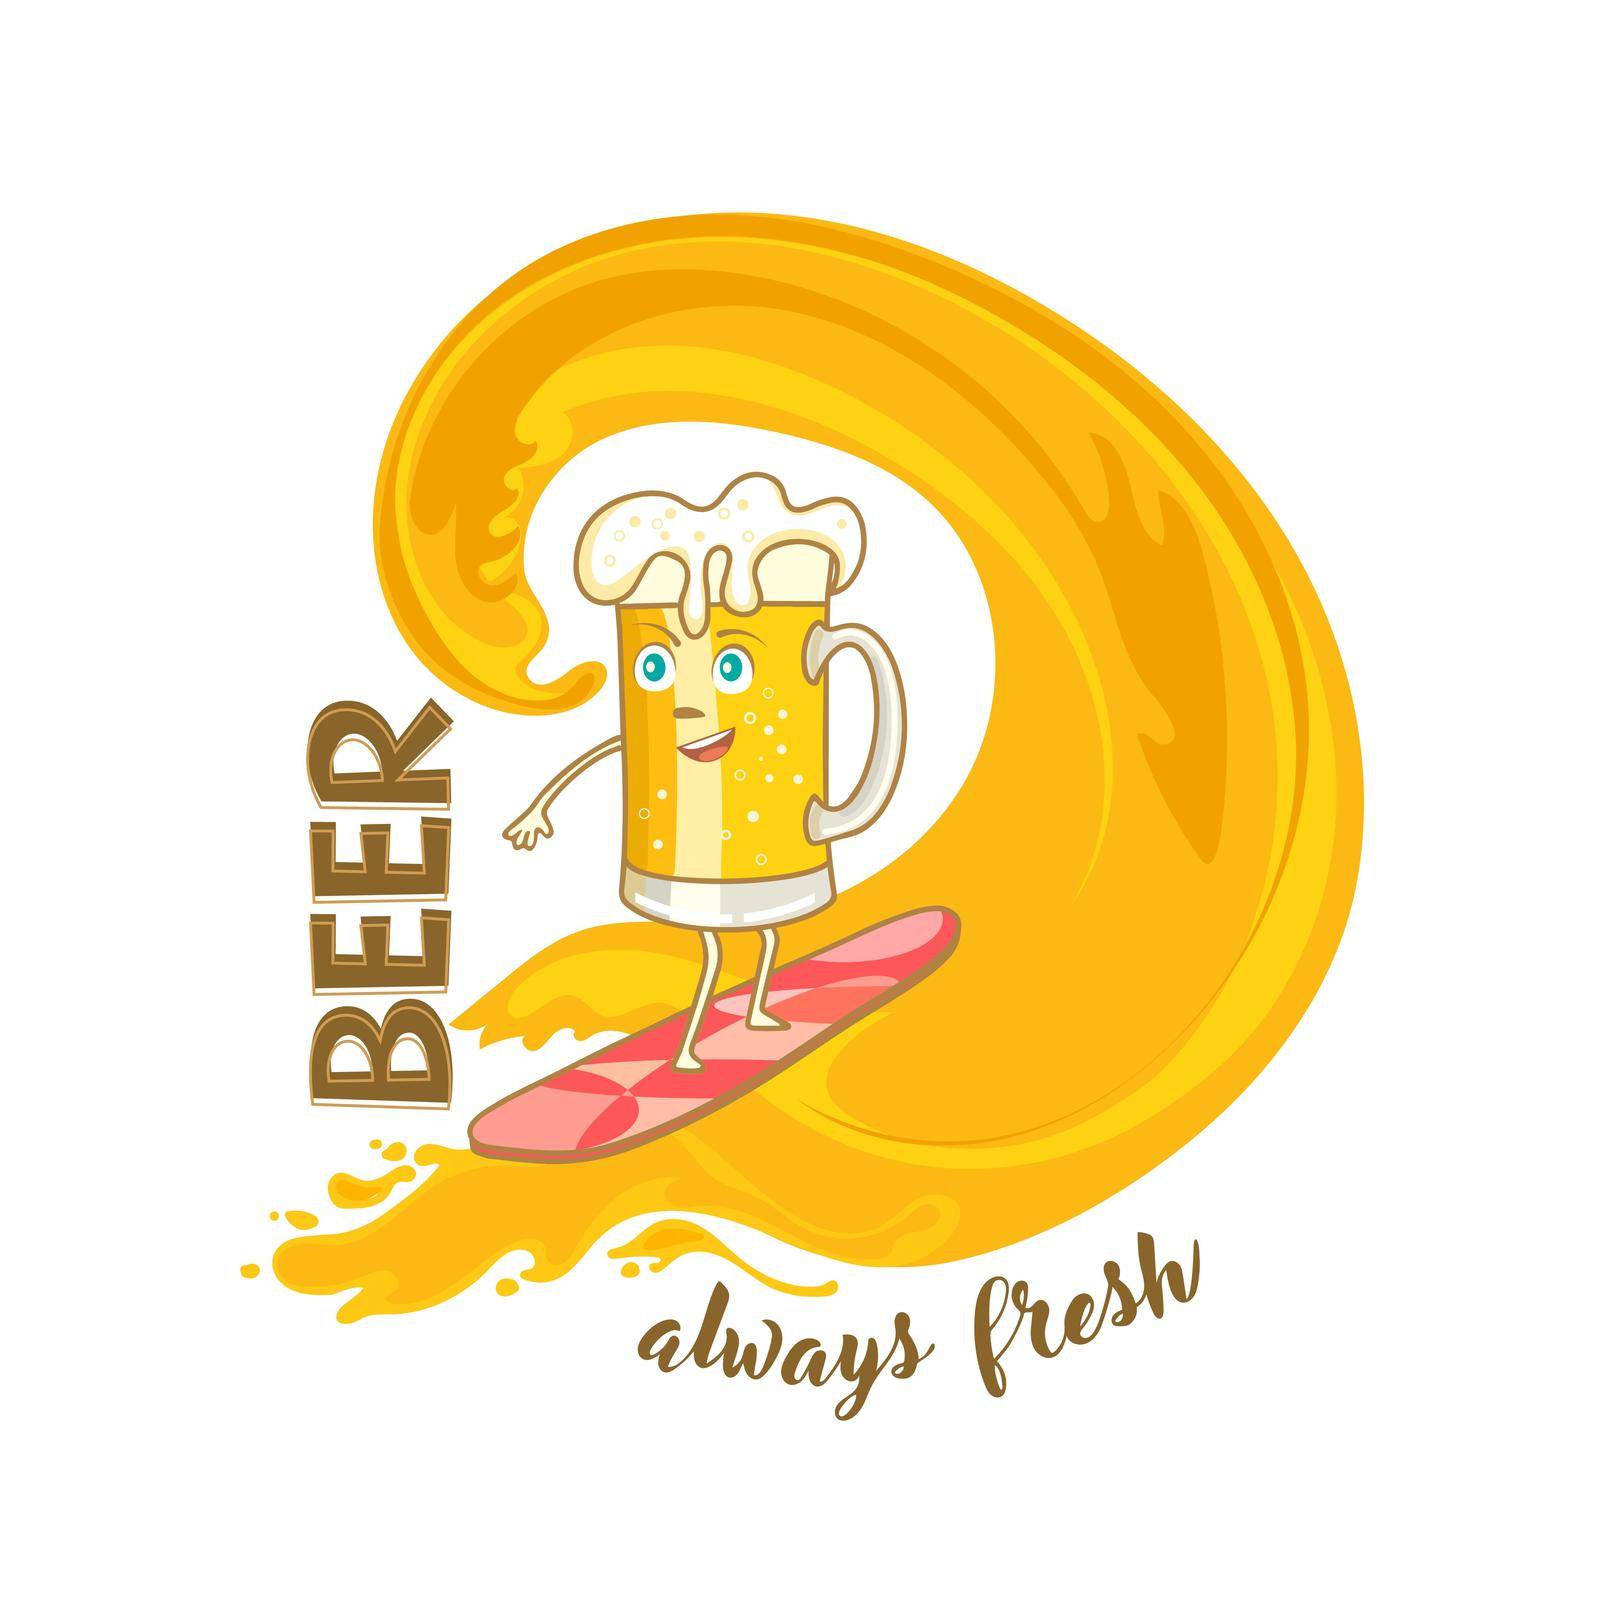 Beer mug cartoon character. Poster with the beer wave logo for advertising draught beer